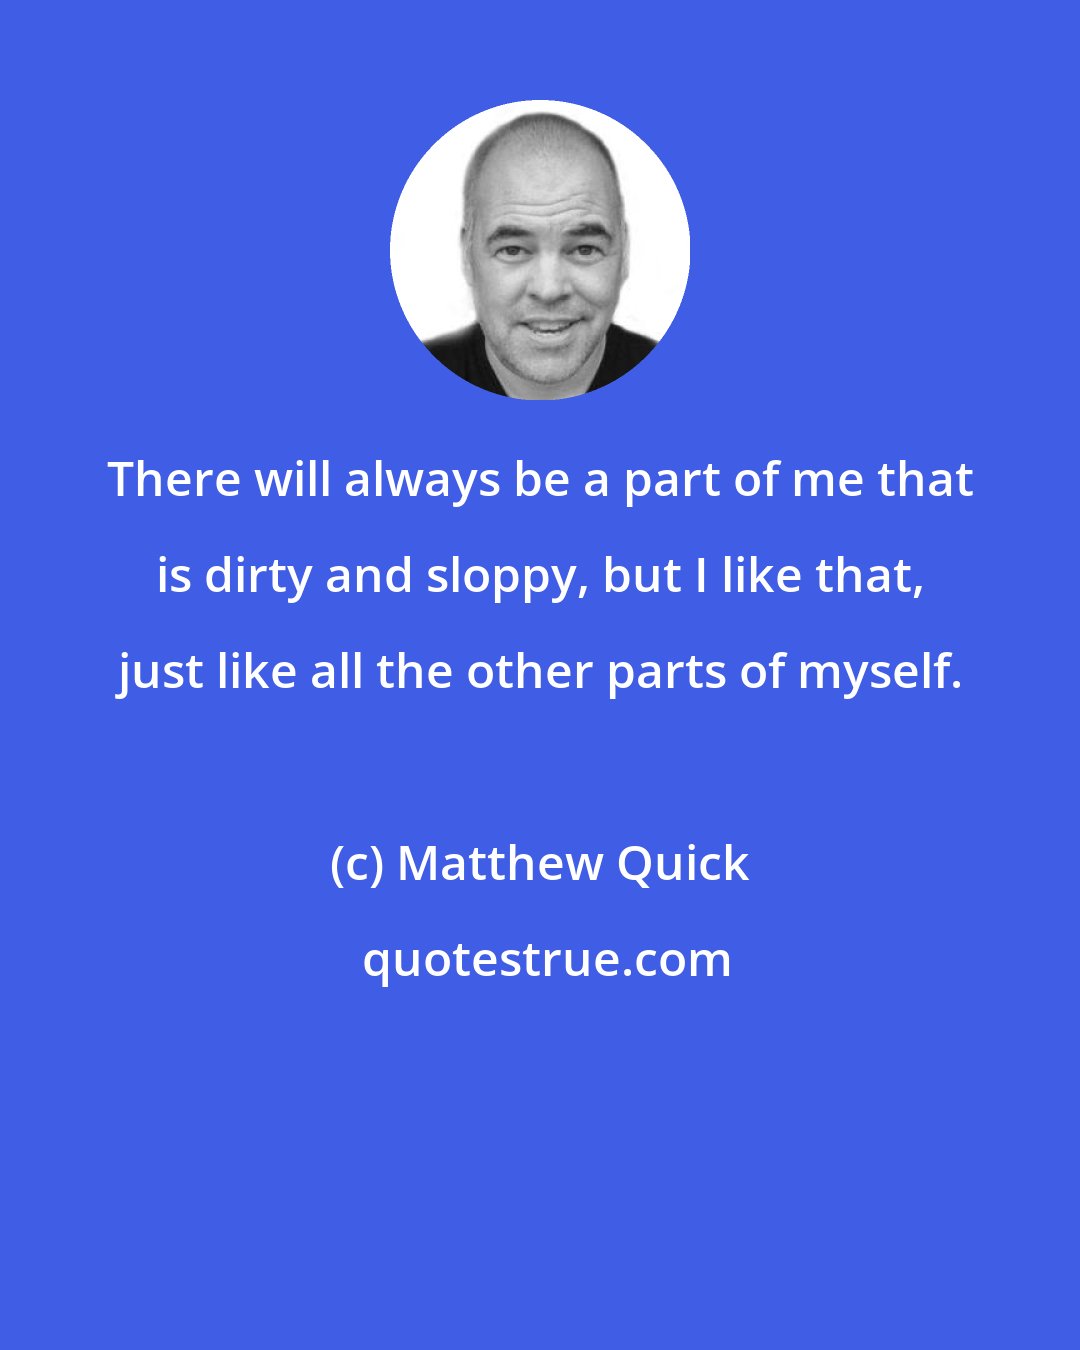 Matthew Quick: There will always be a part of me that is dirty and sloppy, but I like that, just like all the other parts of myself.